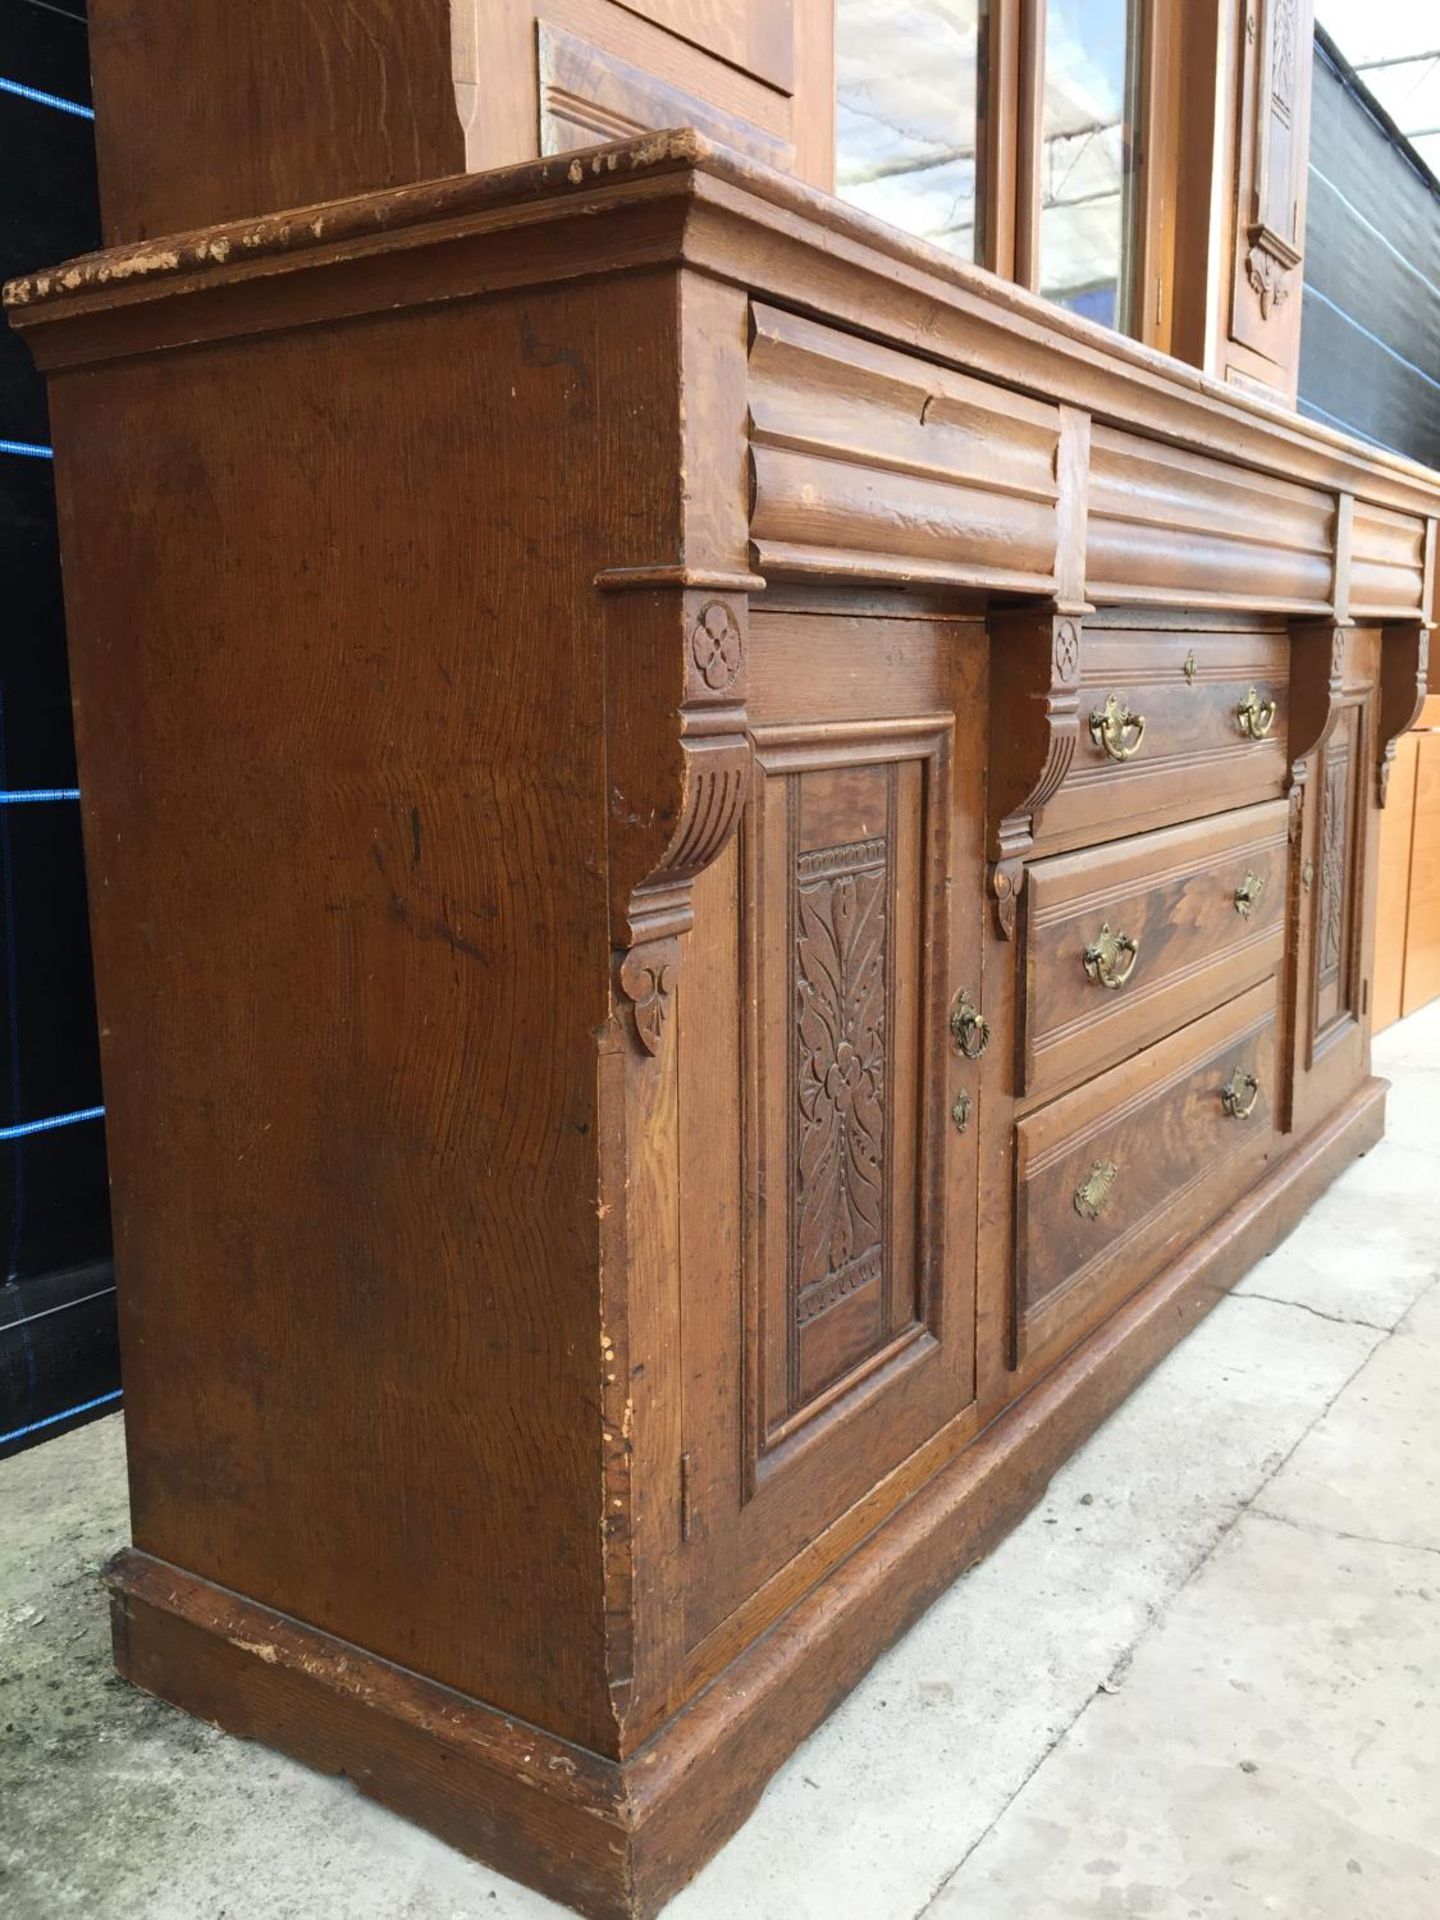 A VICTORIAN SCUMBLED PINE DRESSER, 74" WIDE, WITH INVERTED BREAKFRONT UPPER PORTION, HAVING PANELLED - Image 3 of 10